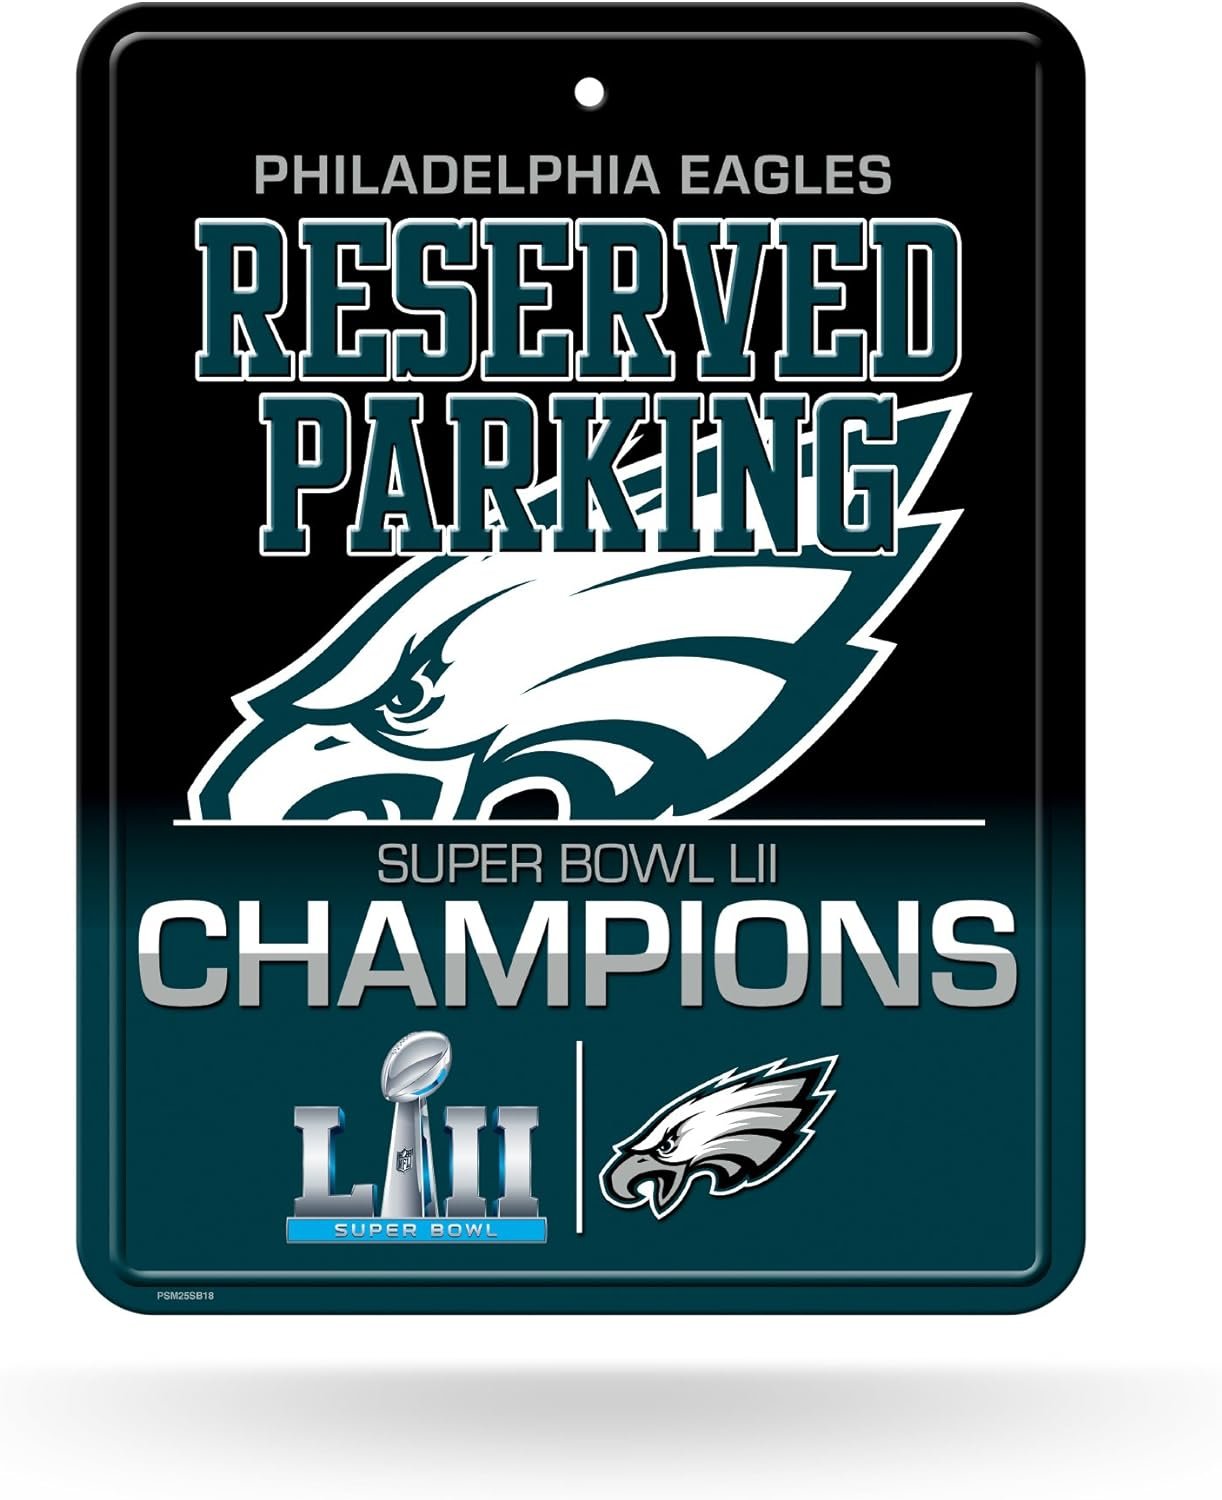 Philadelphia Eagles Super Bowl LII Champions Metal Wall Parking Sign, 8.5x11 Inch, Great for Man Cave, Bed Room, Office, Home Decor